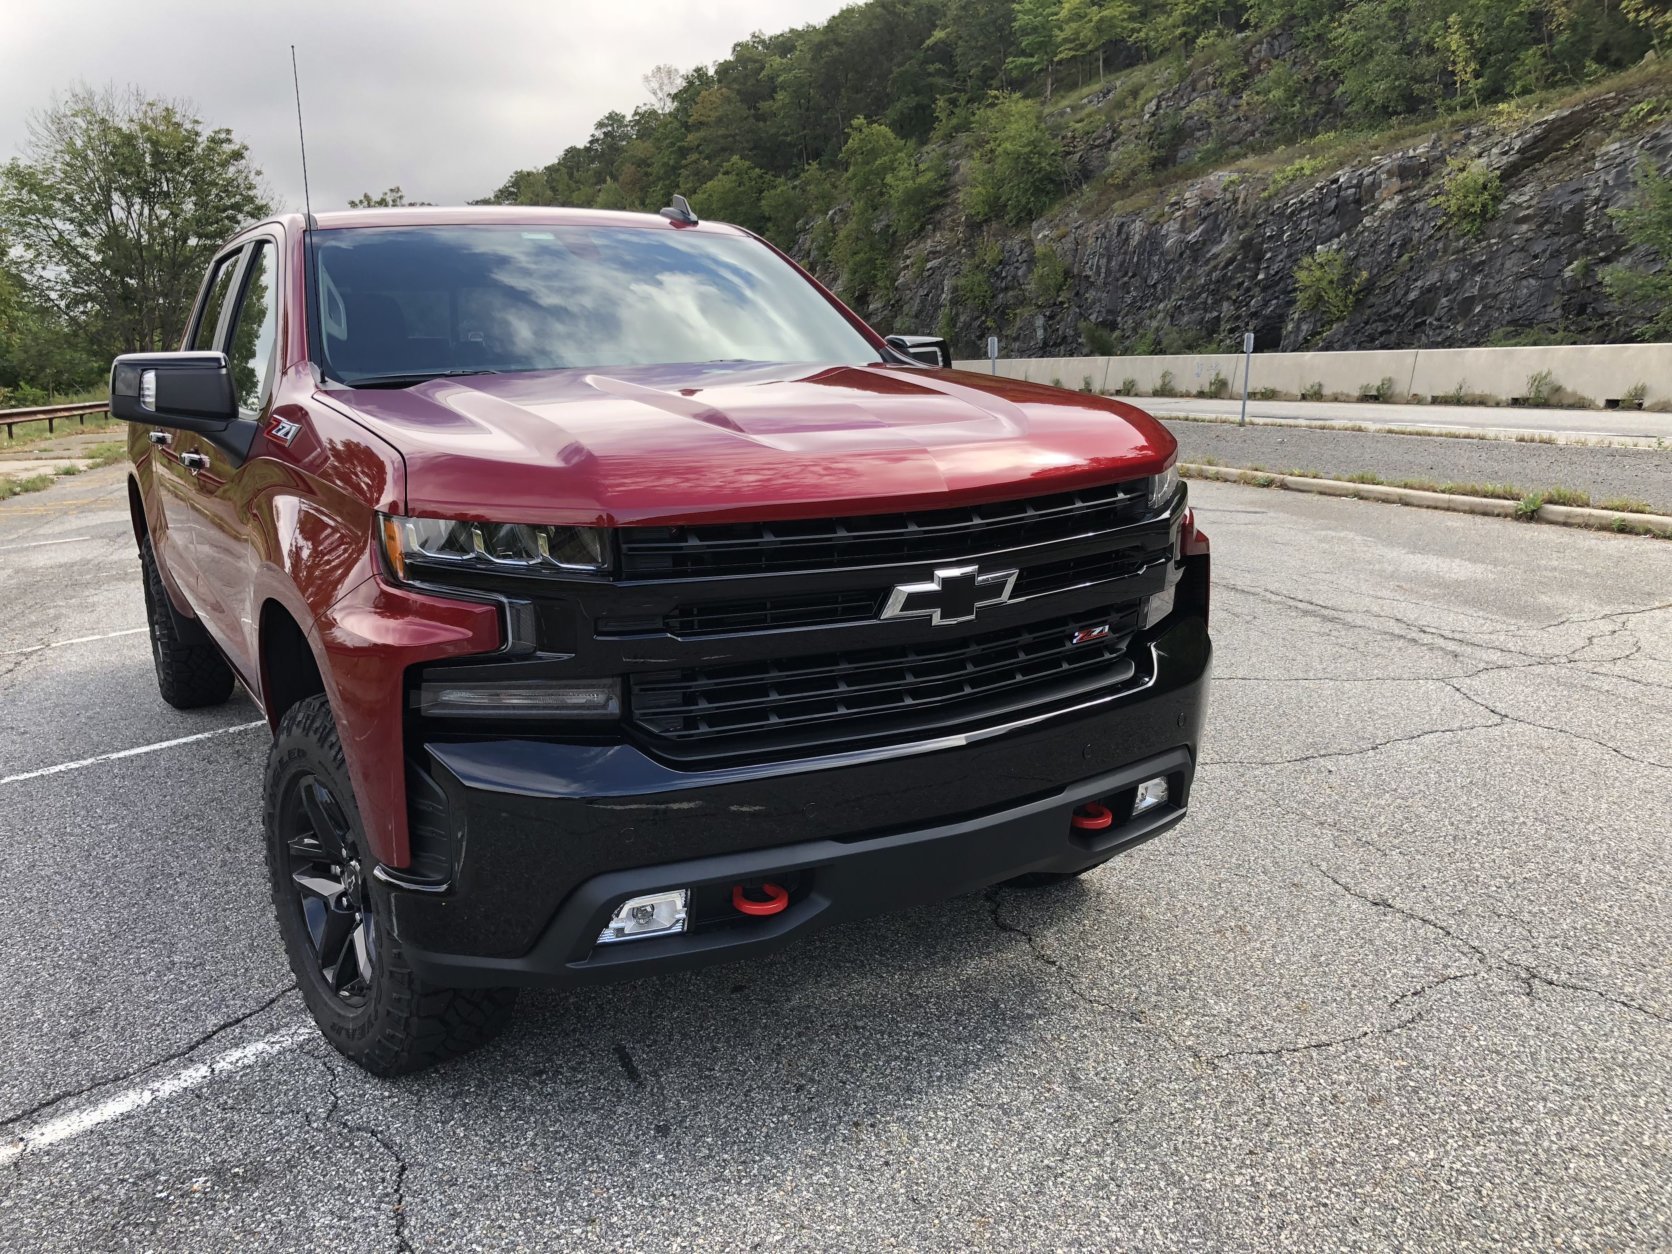 The blacked-out grill on the Trail Boss version WTOP's Mike Parris drove got more favorable comments than models with chromed grills. The front end is very modern-looking, with smaller and slender headlight assemblies. (WTOP/Mike Parris) 